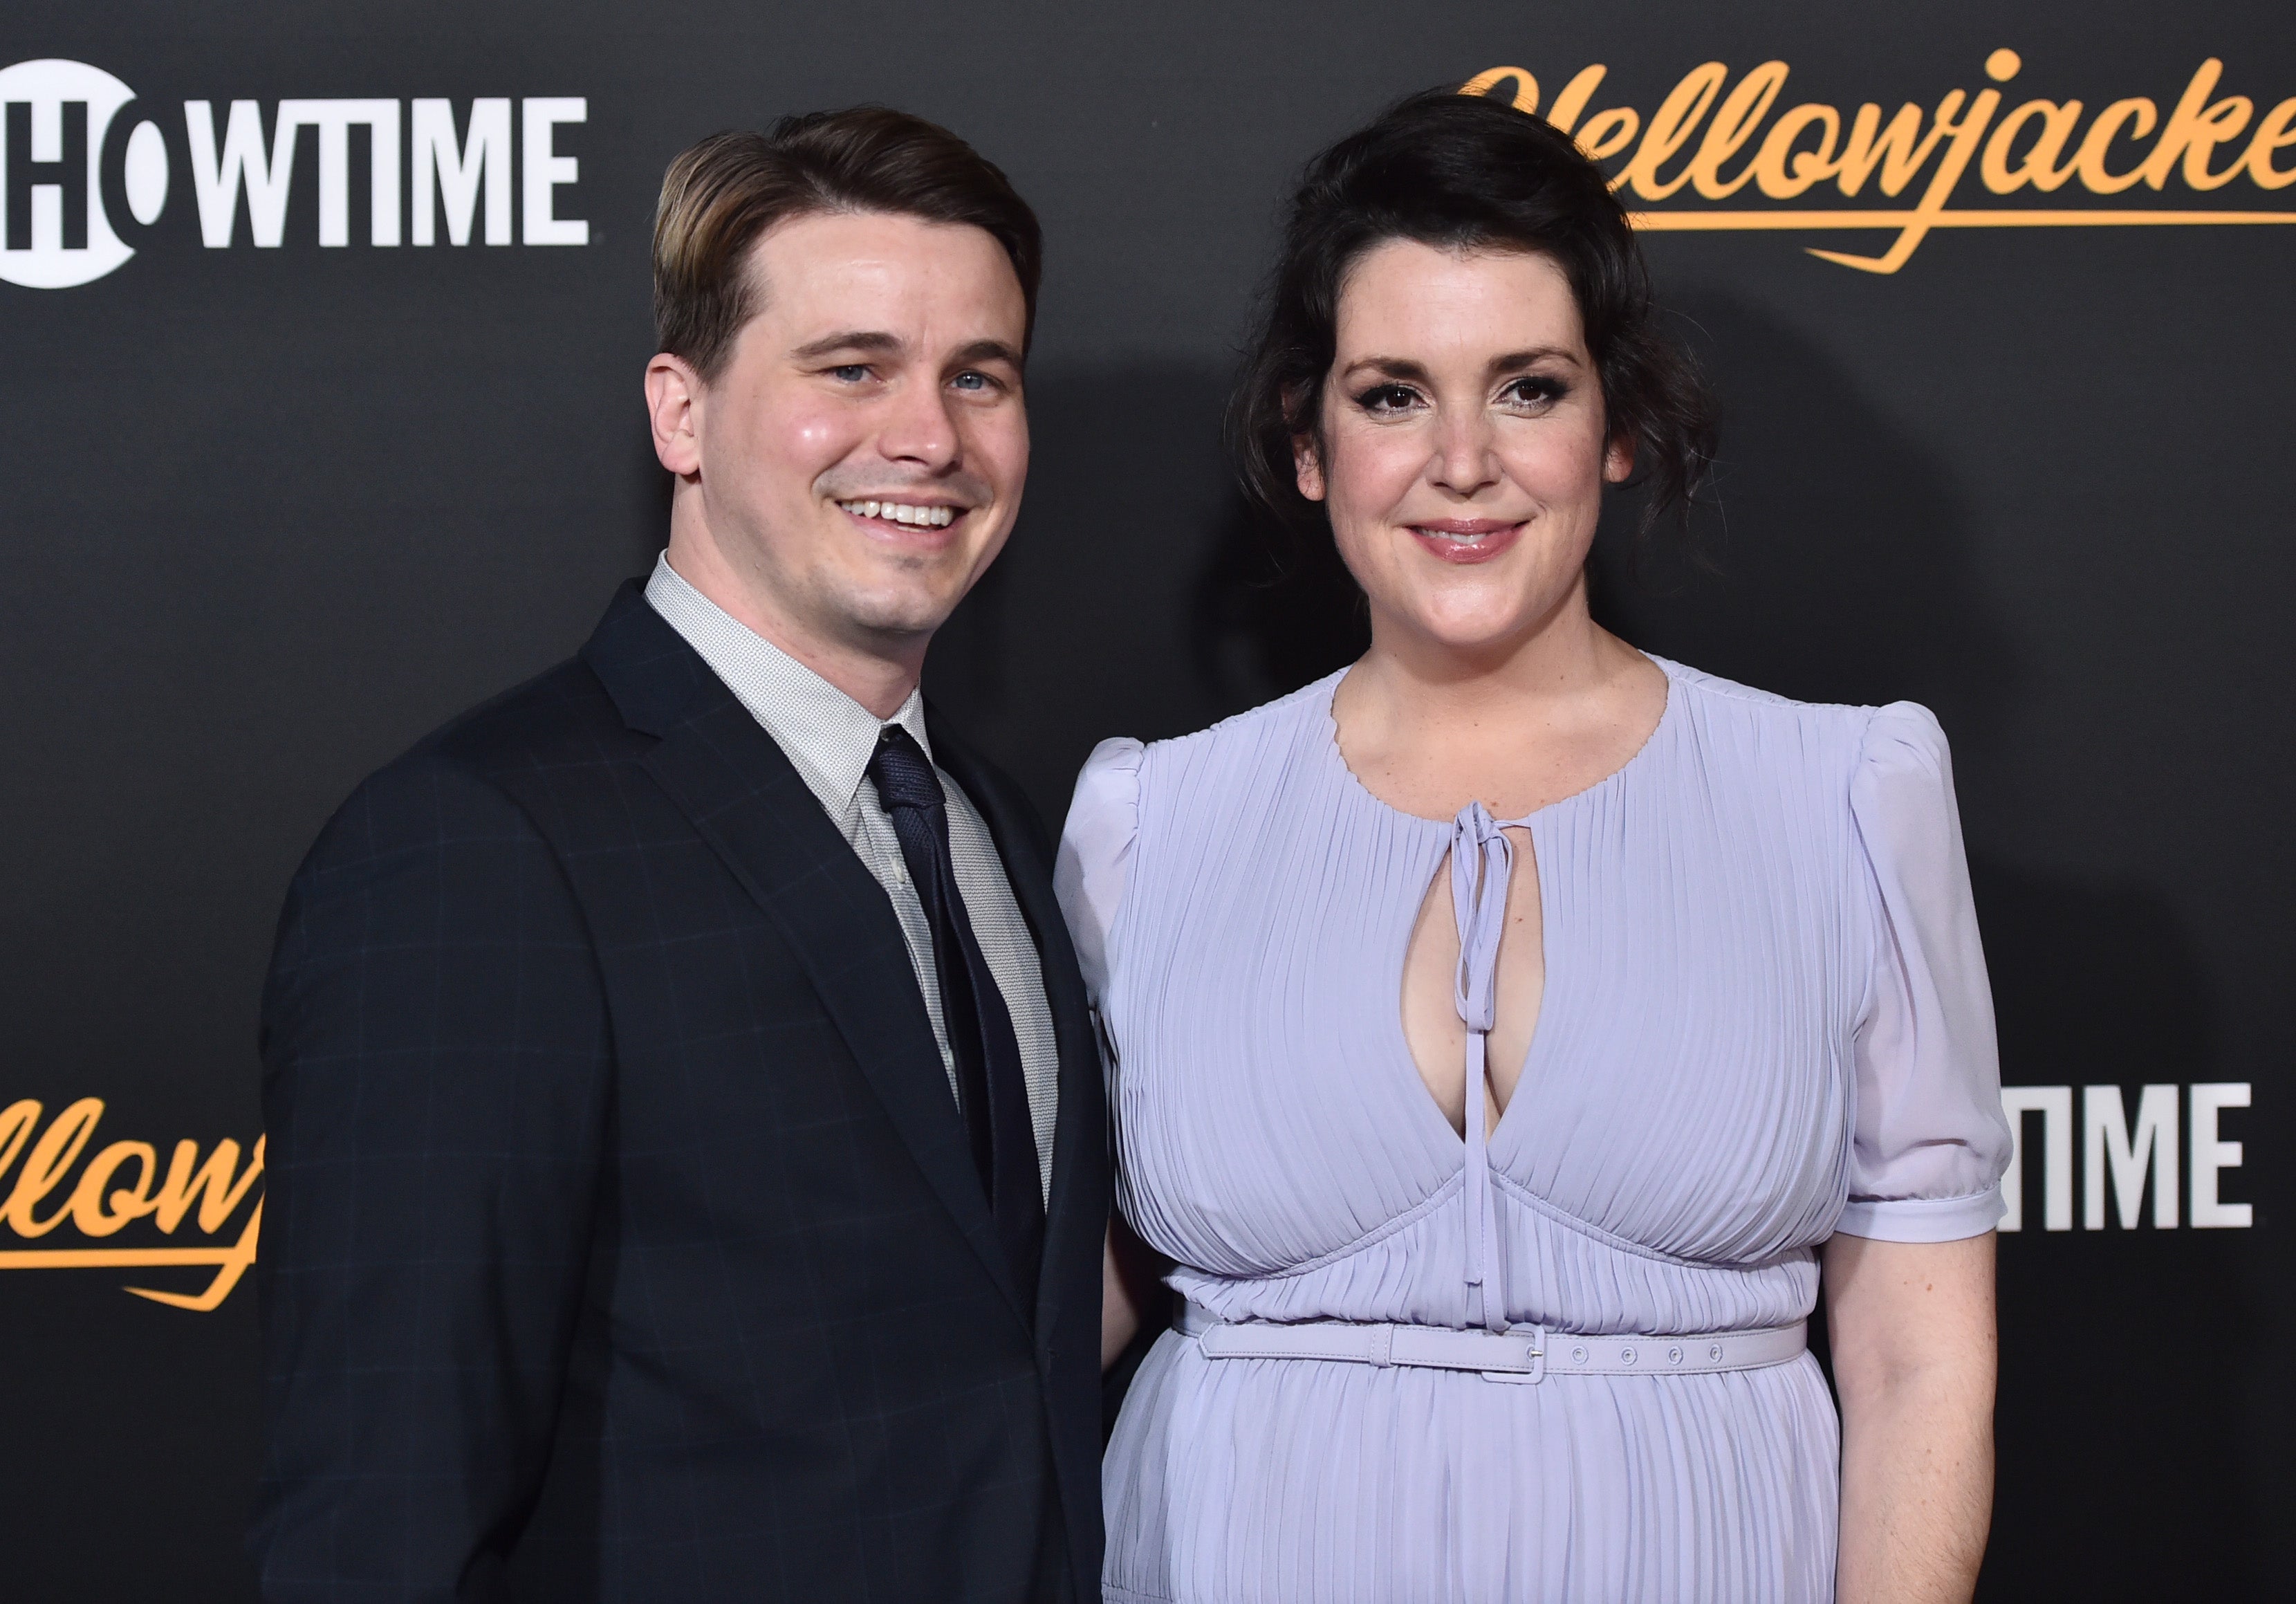 Jason Ritter defends wife Melanie Lynskey after she speaks out against body-shaming comments The Independent image